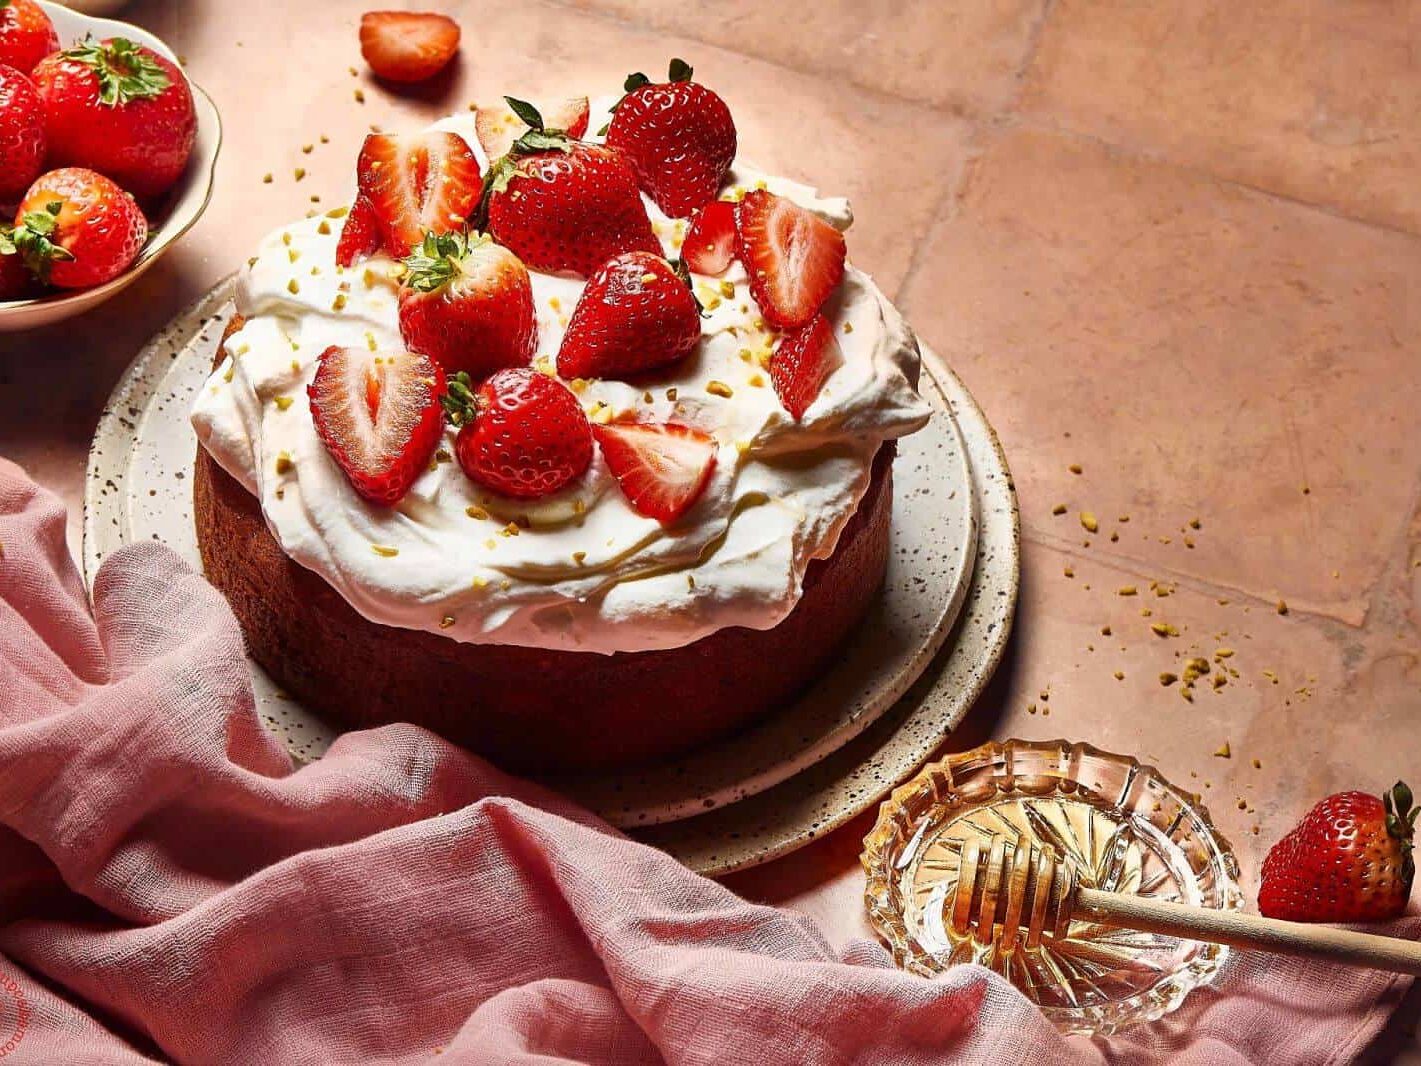 A cake with strawberries and whipped cream on a table.